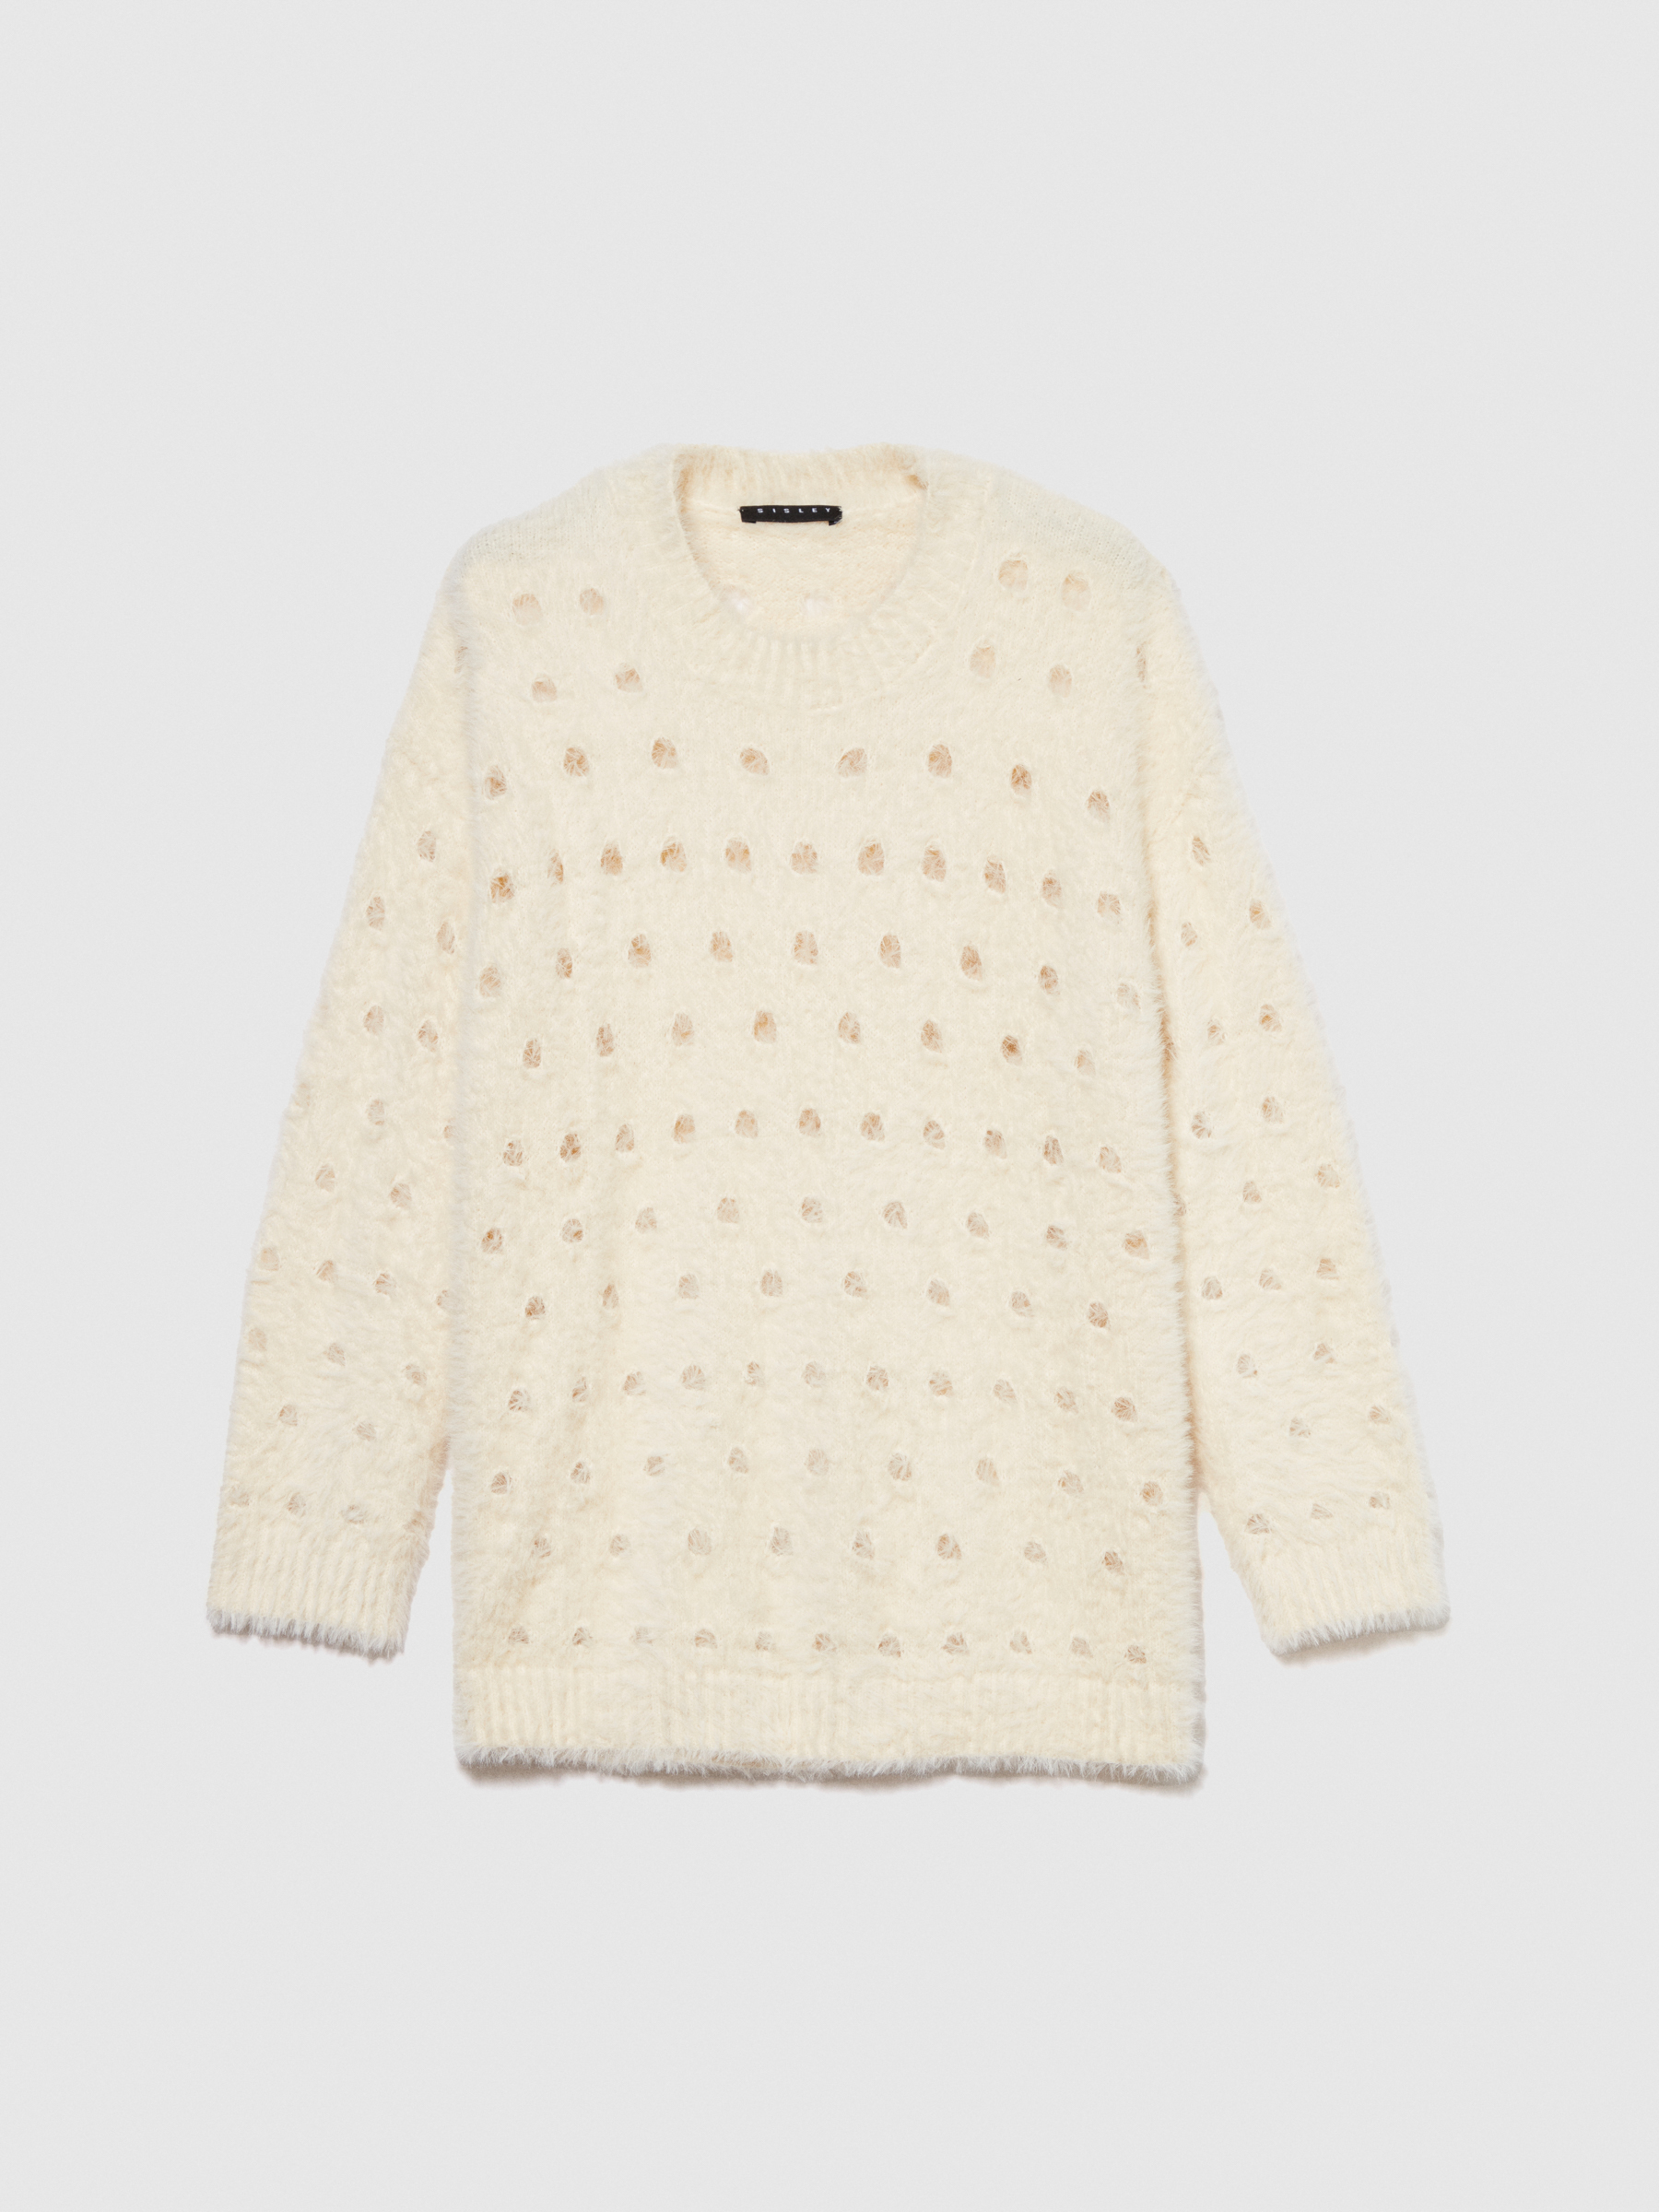 Sisley Young - Fluffy Open-knit Sweater, Woman, Creamy White, Size: S